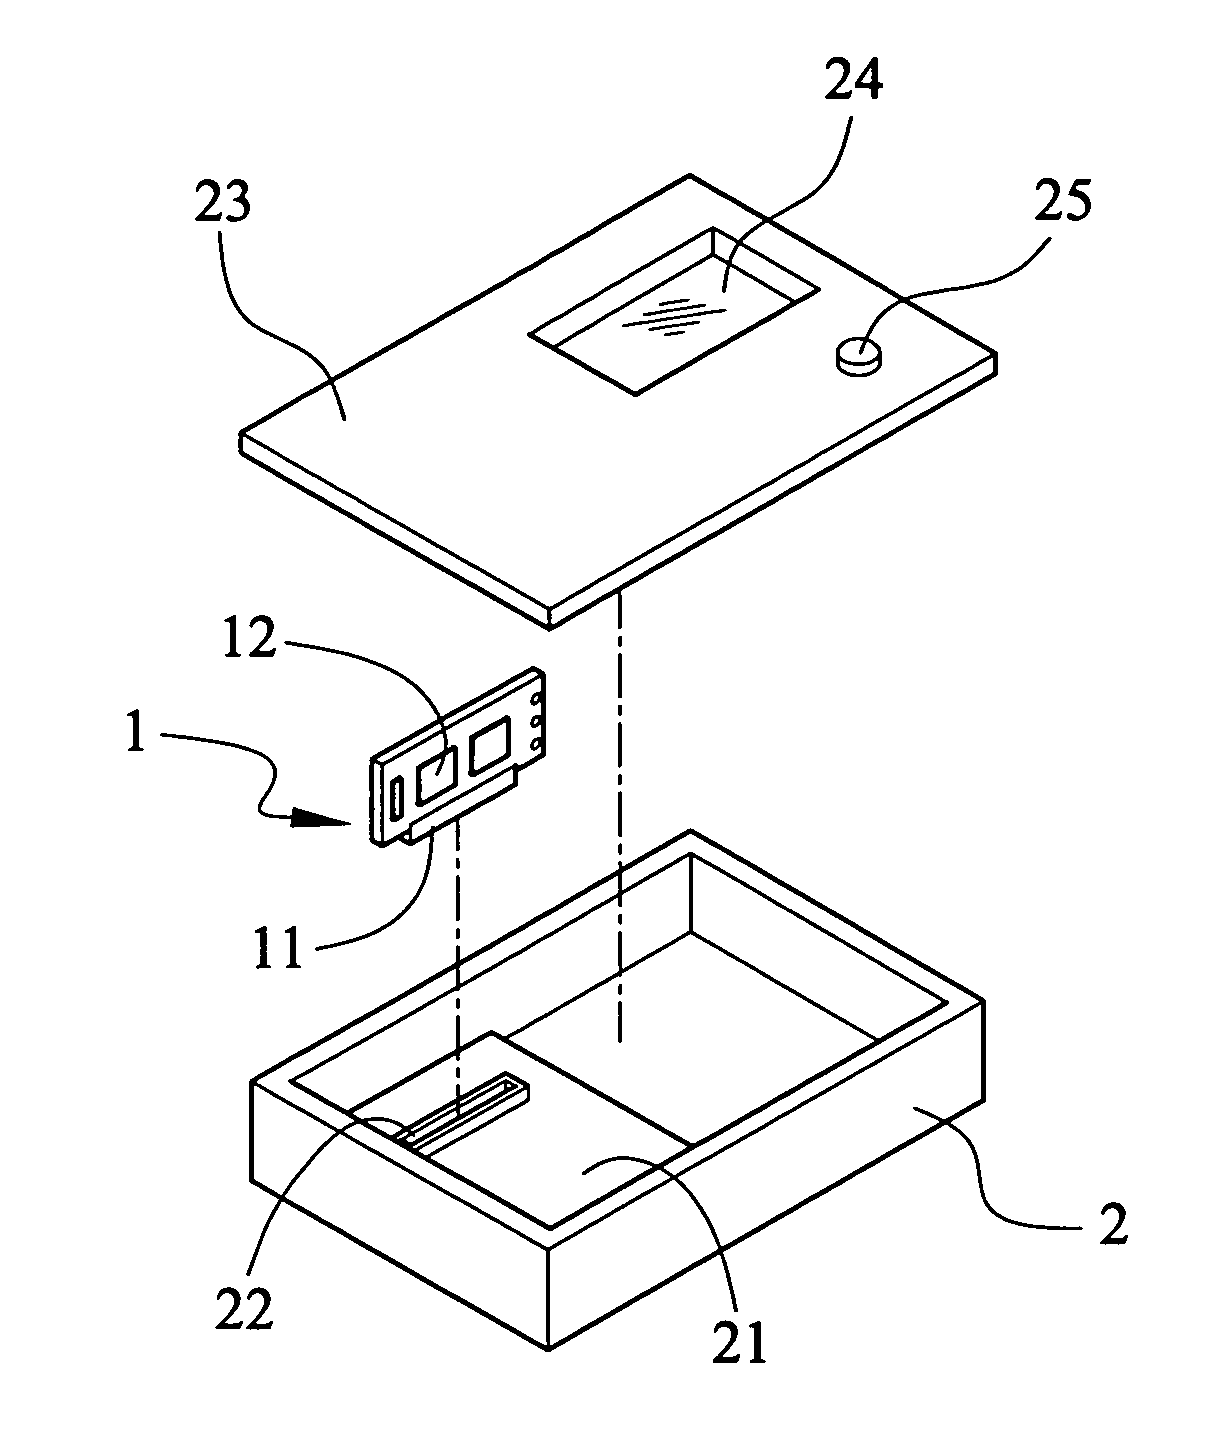 Wireless motion monitoring device incorporating equipment control module of an exercise equipment